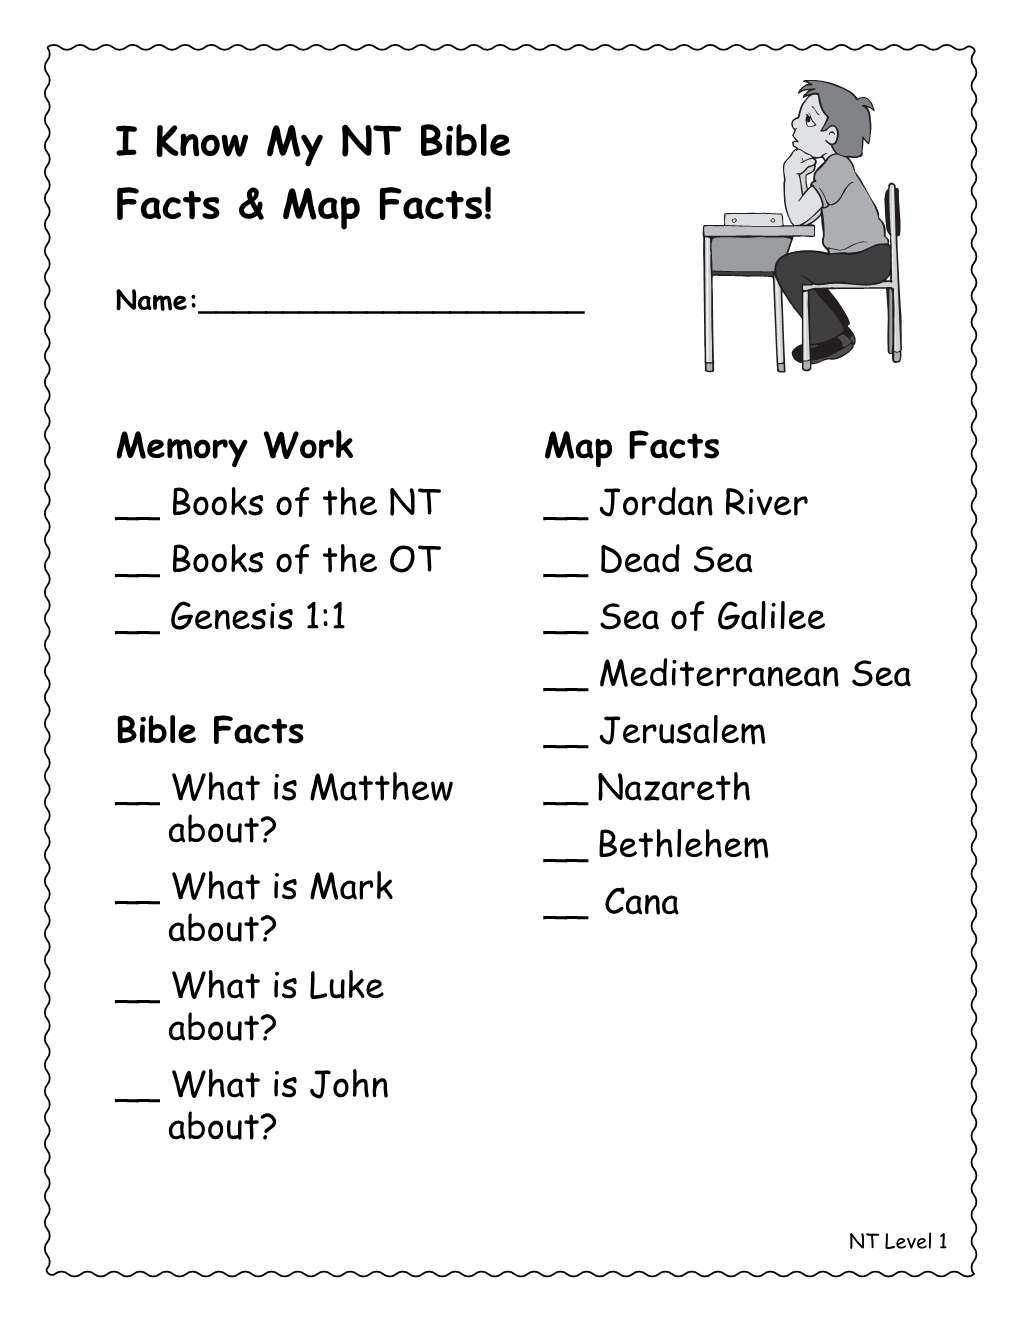 I Know My NT Bible Facts & Map Facts!